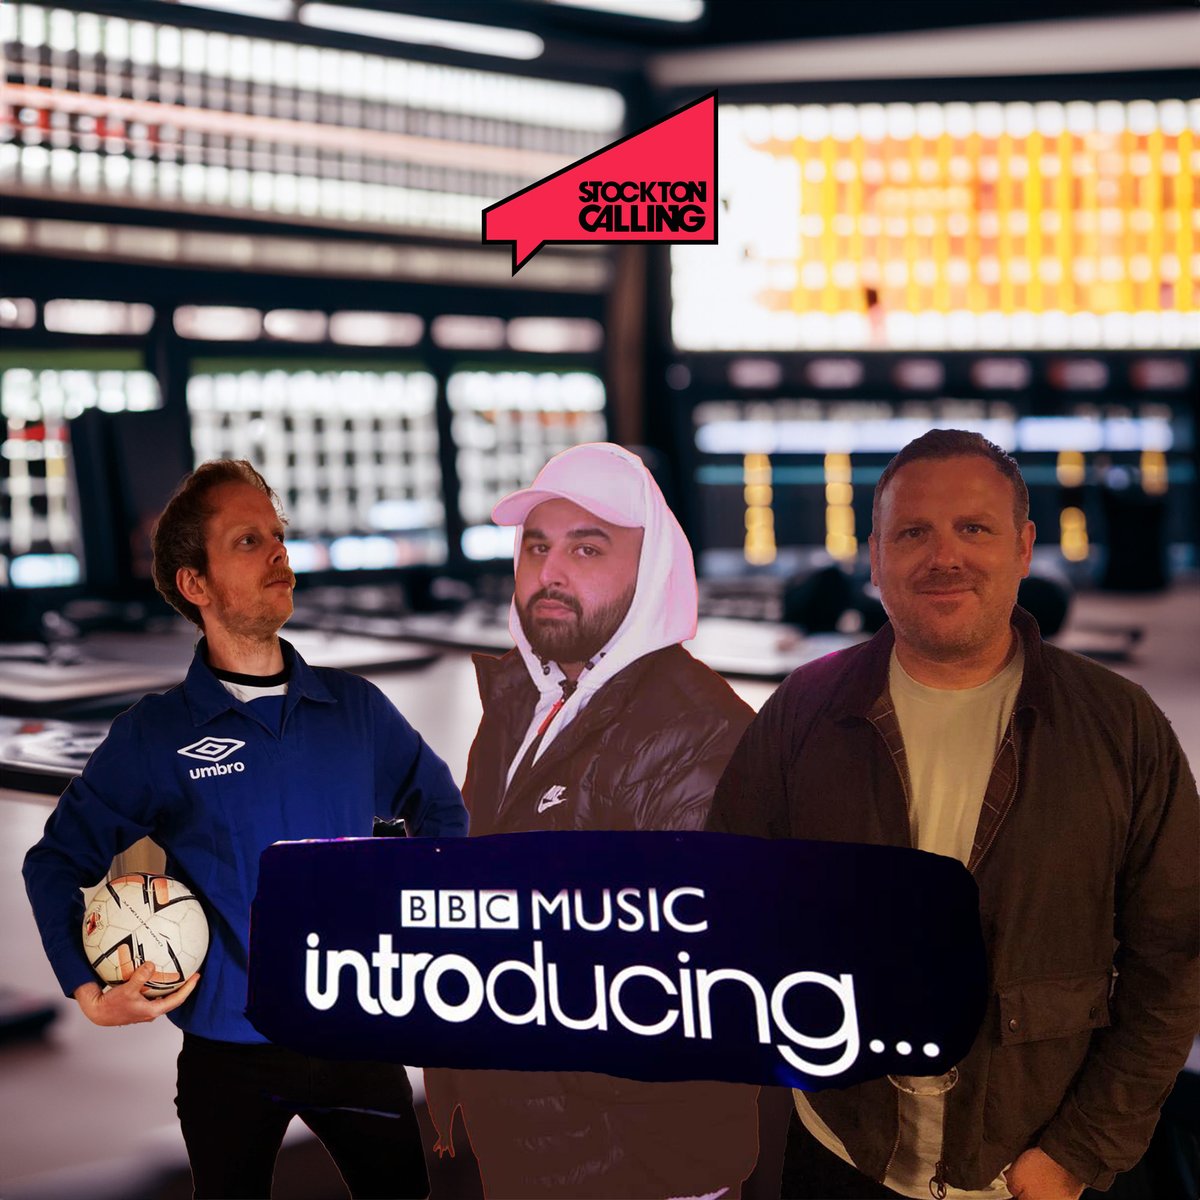 10 Days to Go 😬 Jimmy (@ku_stockton) and Chris ( @NewsTMA) chatted to @shakkmusic over on @bbcintroducing North East last week - they didn't take any photos but lucky for you we recreated what it would have looked like below 👇